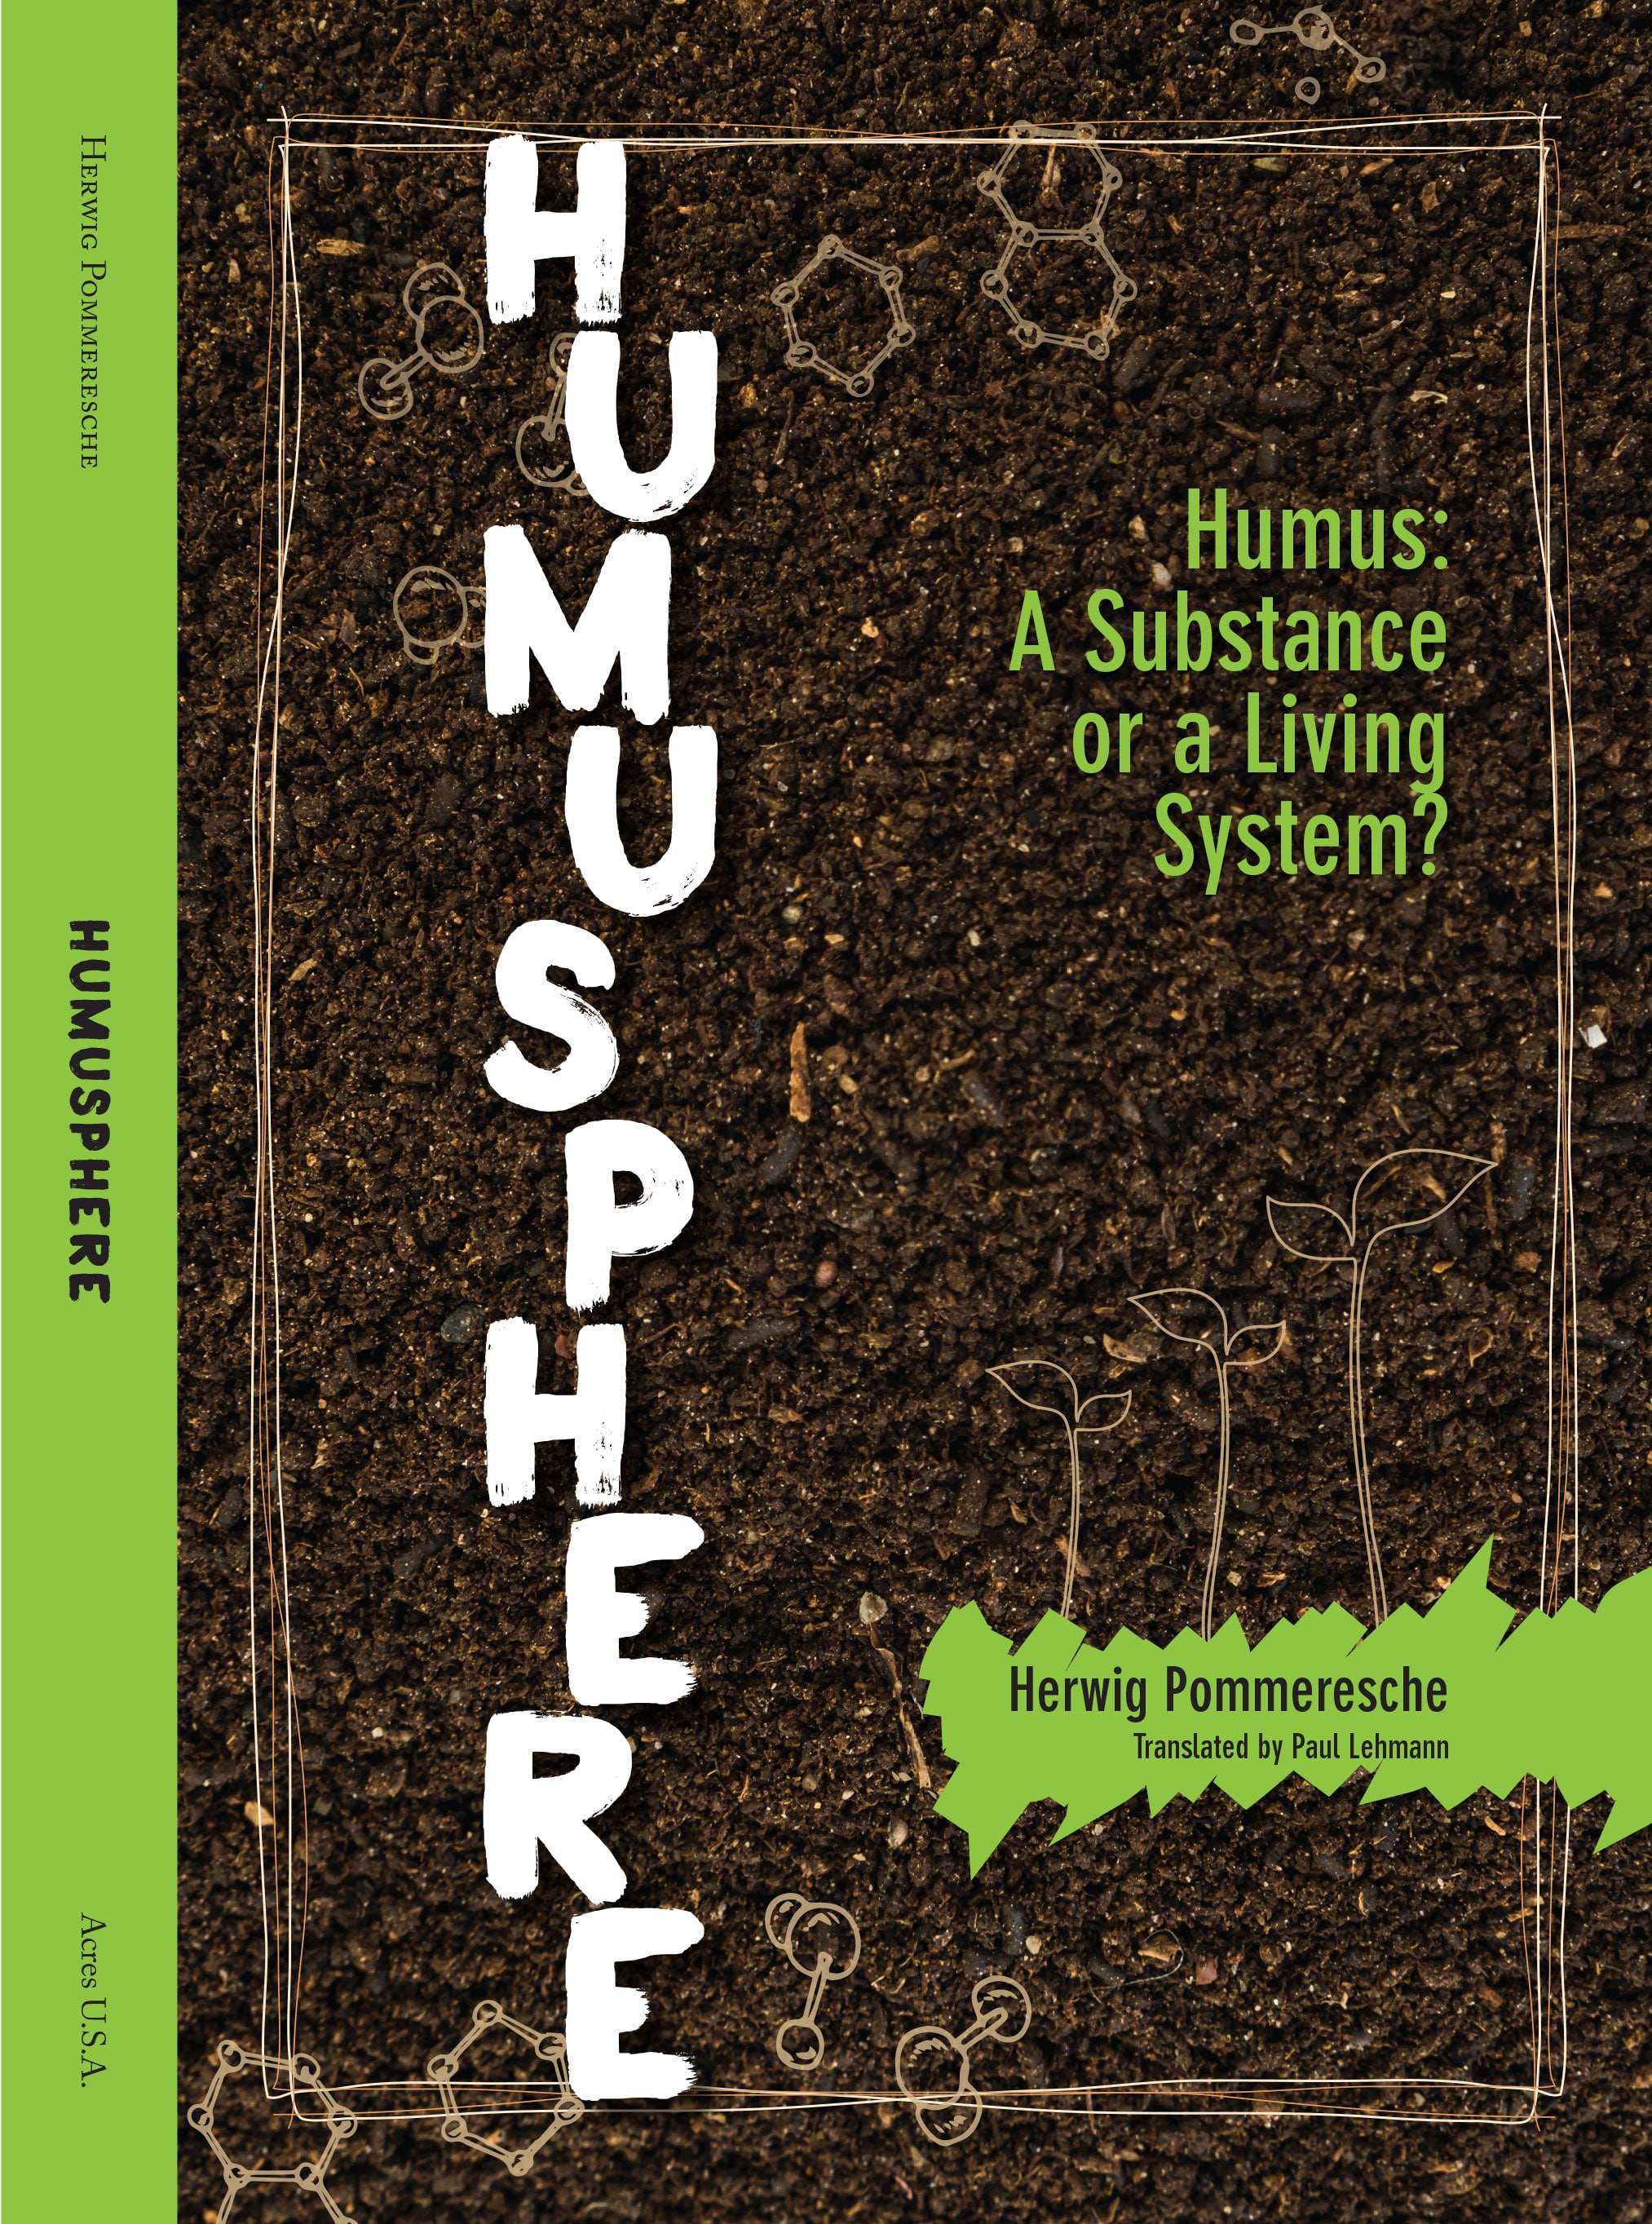 Front cover Humusphere book